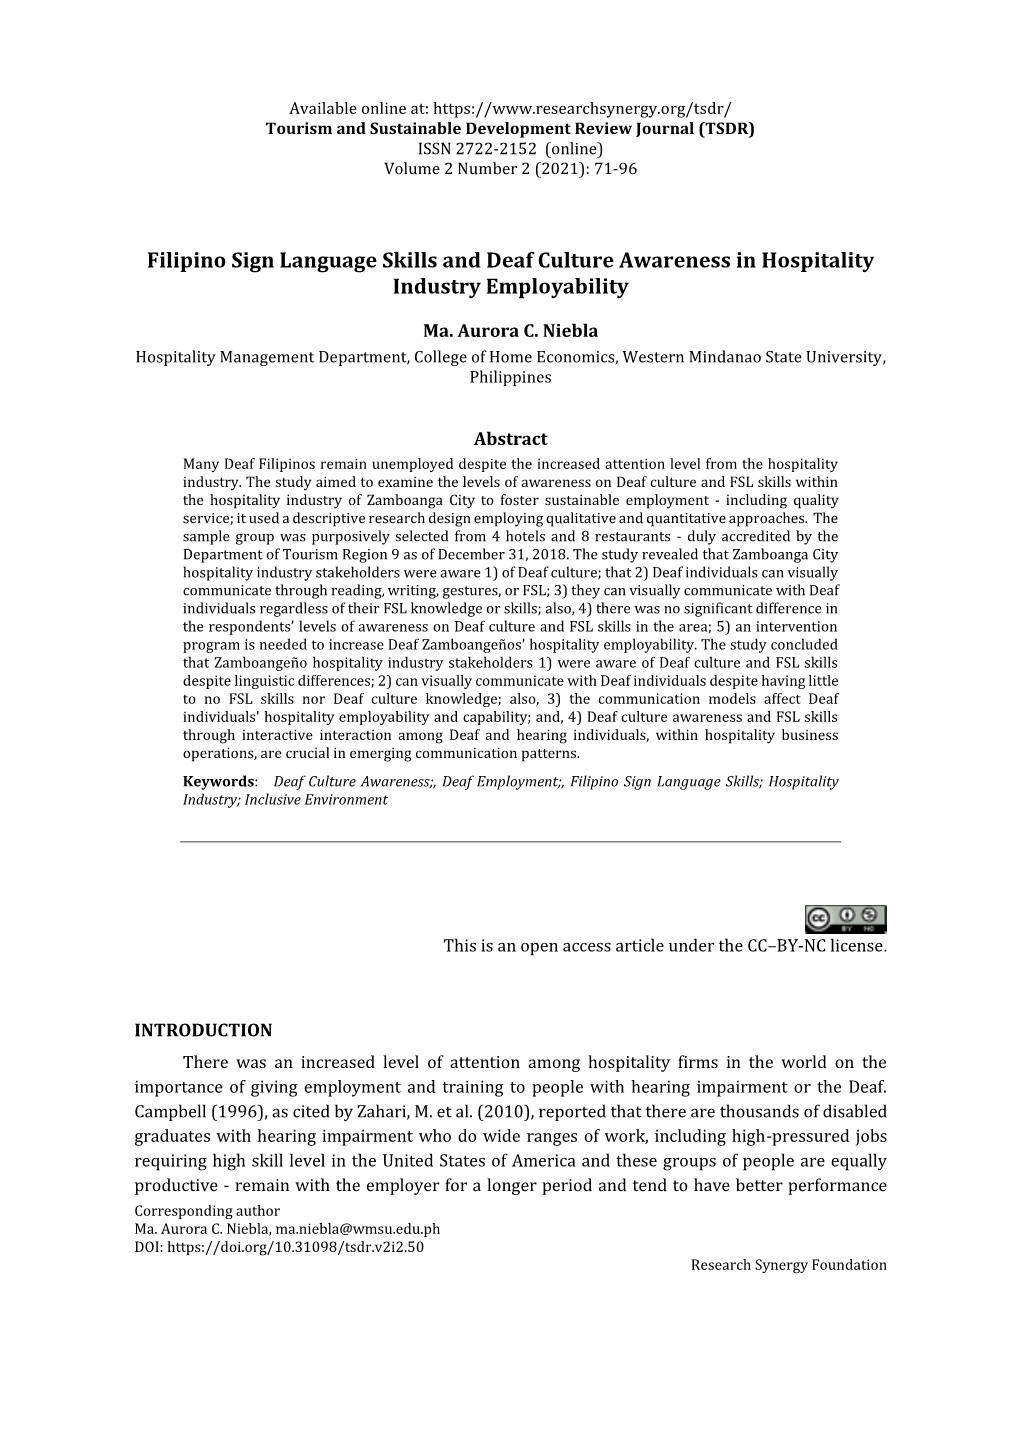 Filipino Sign Language Skills and Deaf Culture Awareness in Hospitality Industry Employability